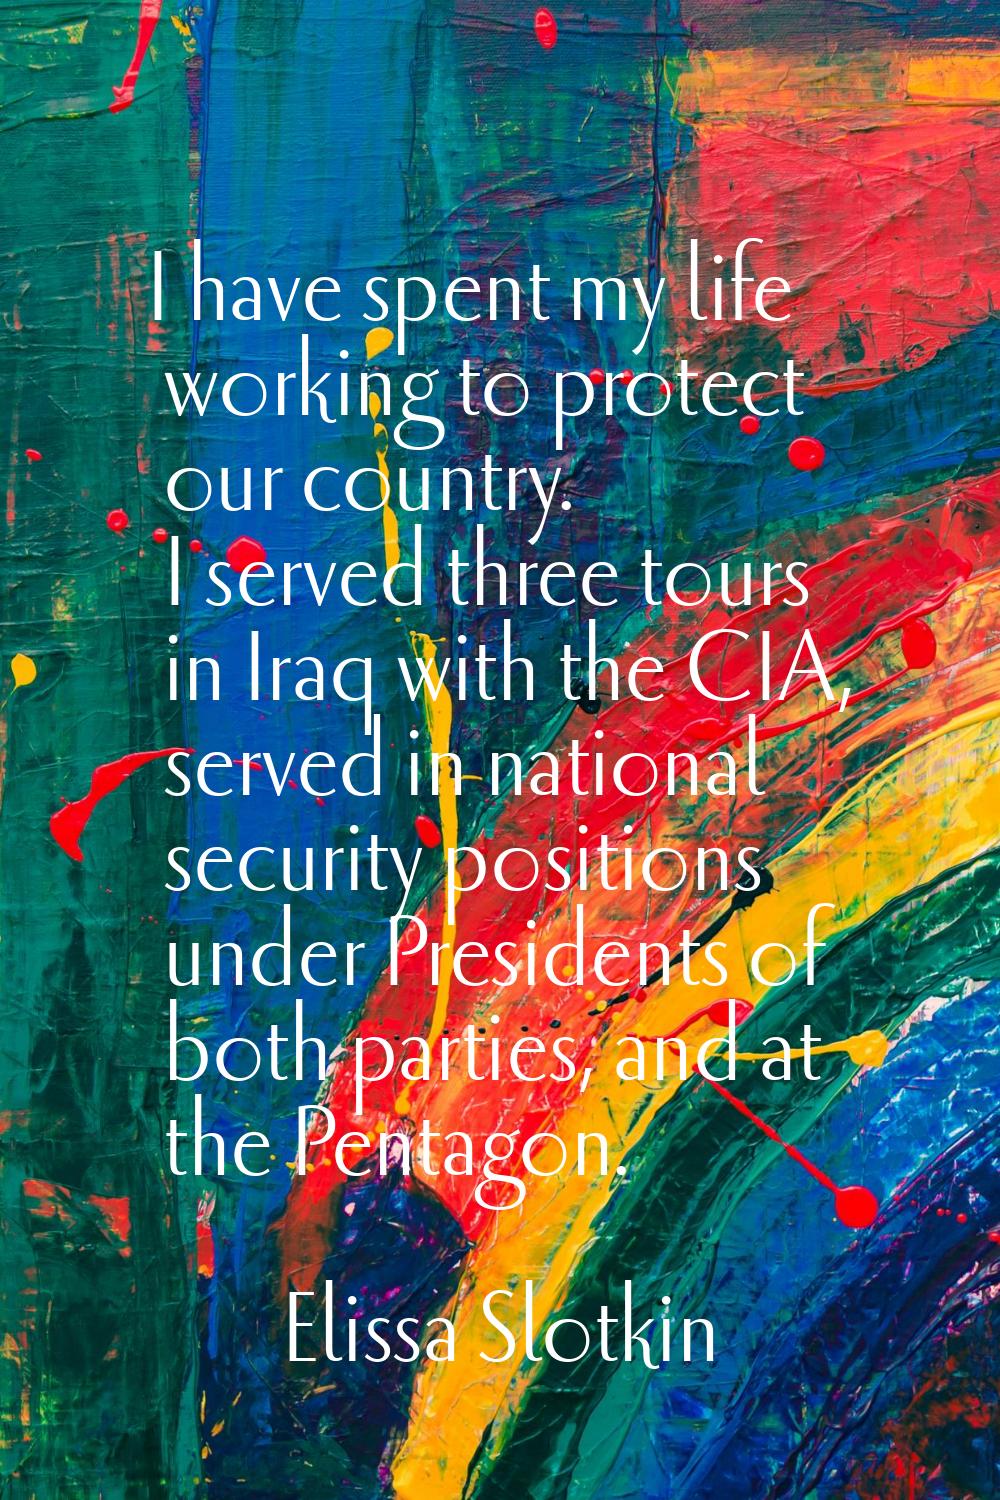 I have spent my life working to protect our country. I served three tours in Iraq with the CIA, ser